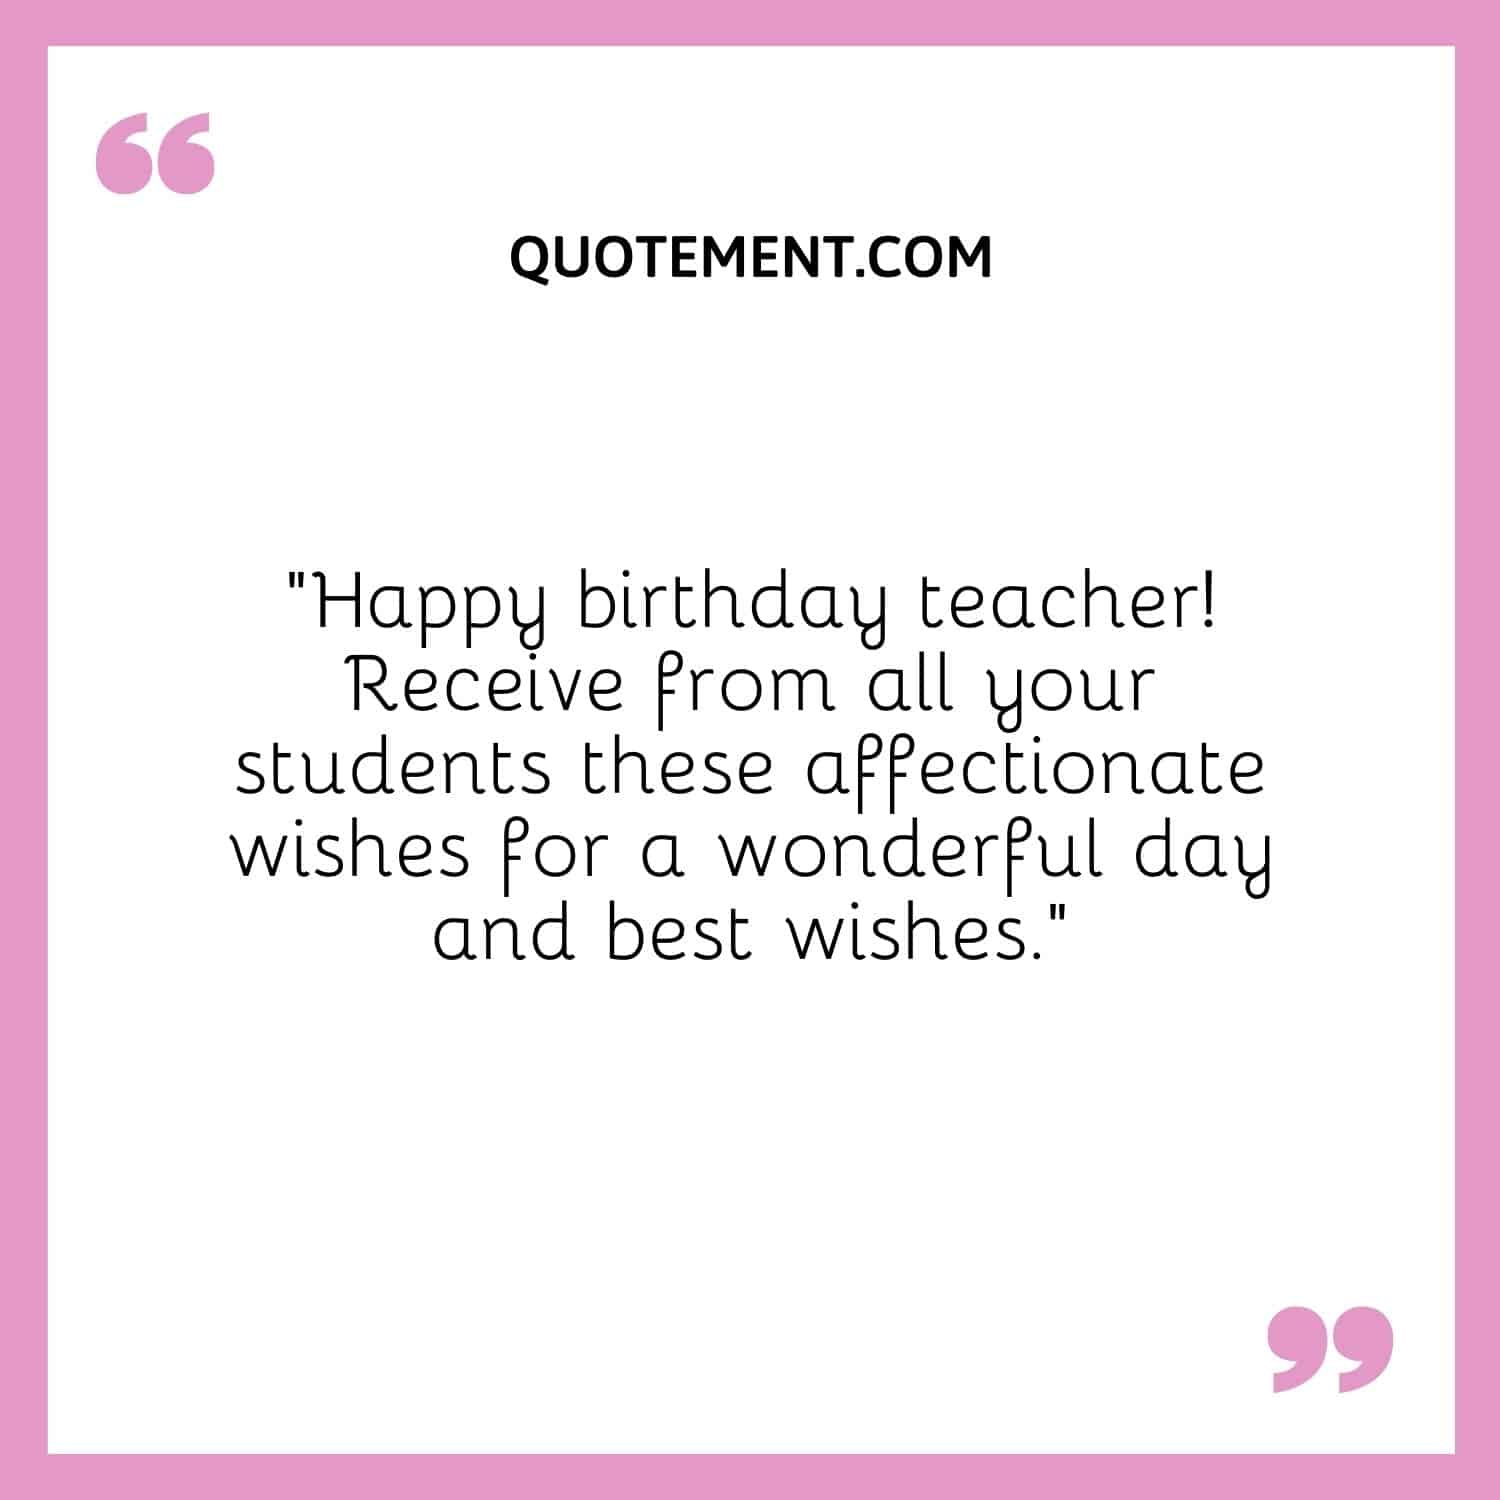 Receive from all your students these affectionate wishes for a wonderful day and best wishes